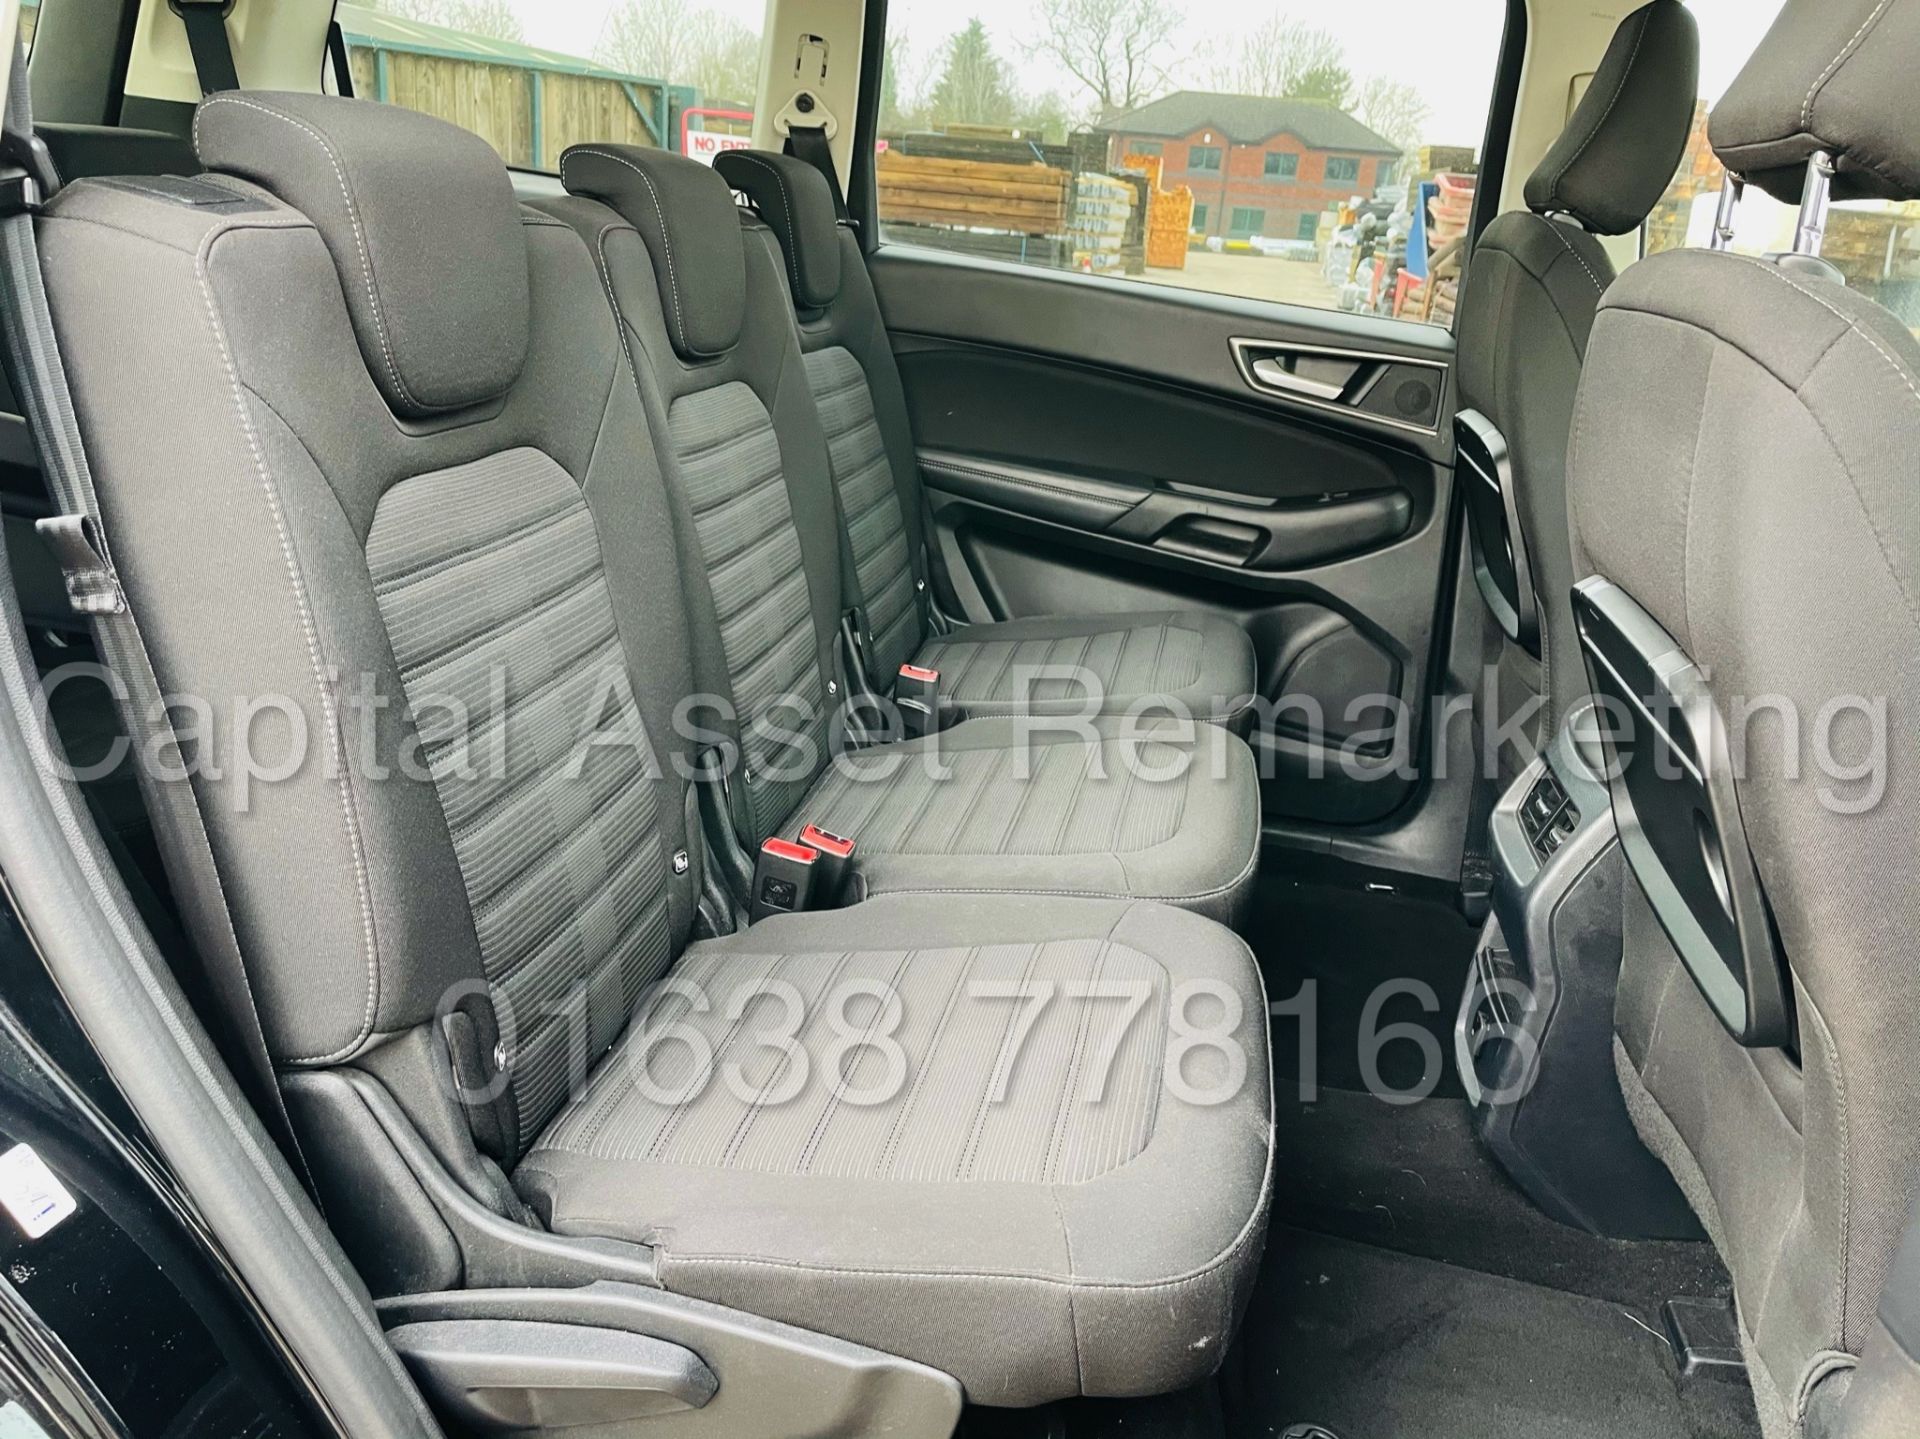 ON SALE FORD GALAXY *ZETEC EDITION* 7 SEATER MPV (2017 - EURO 6) '2.0 TDCI - AUTO' (- FULL HISTORY) - Image 30 of 48